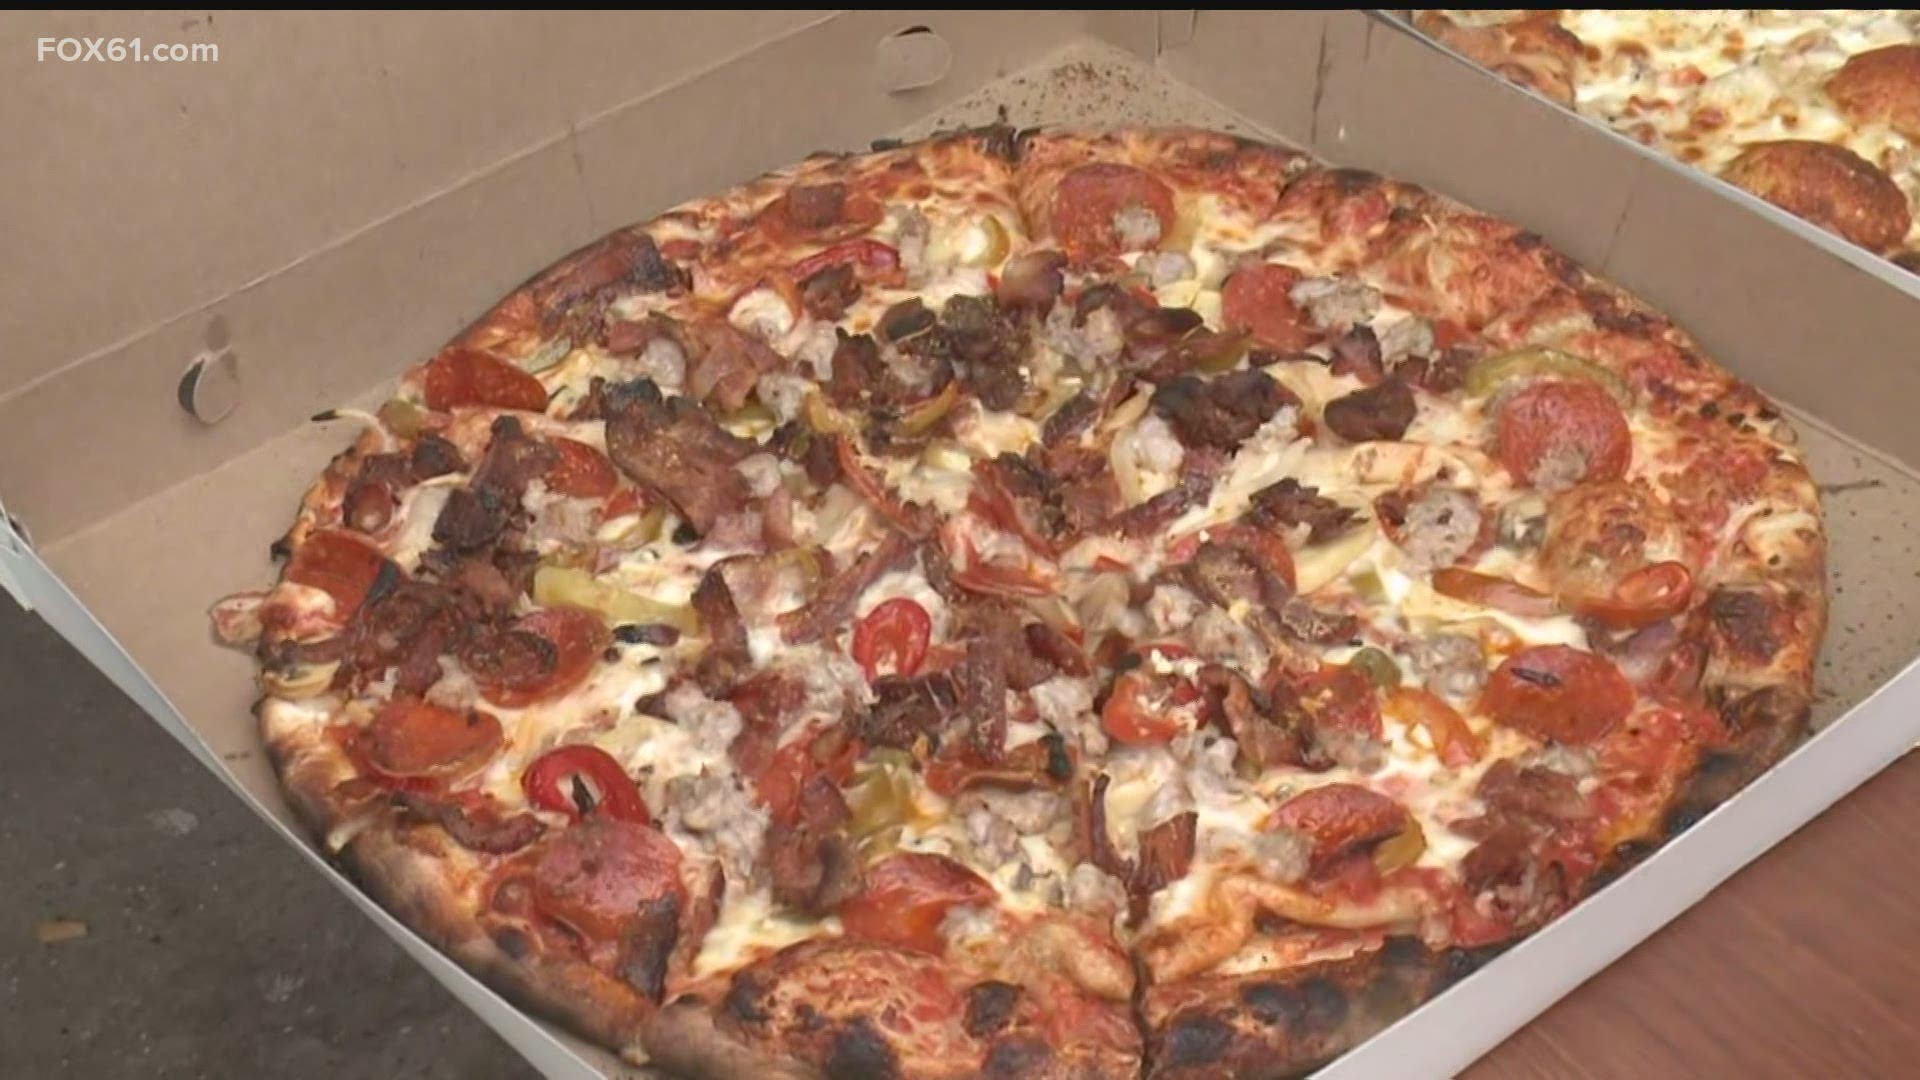 For this week's Foodie Friday, Sean Pragano visited some of your top recommended pizza stops in CT!